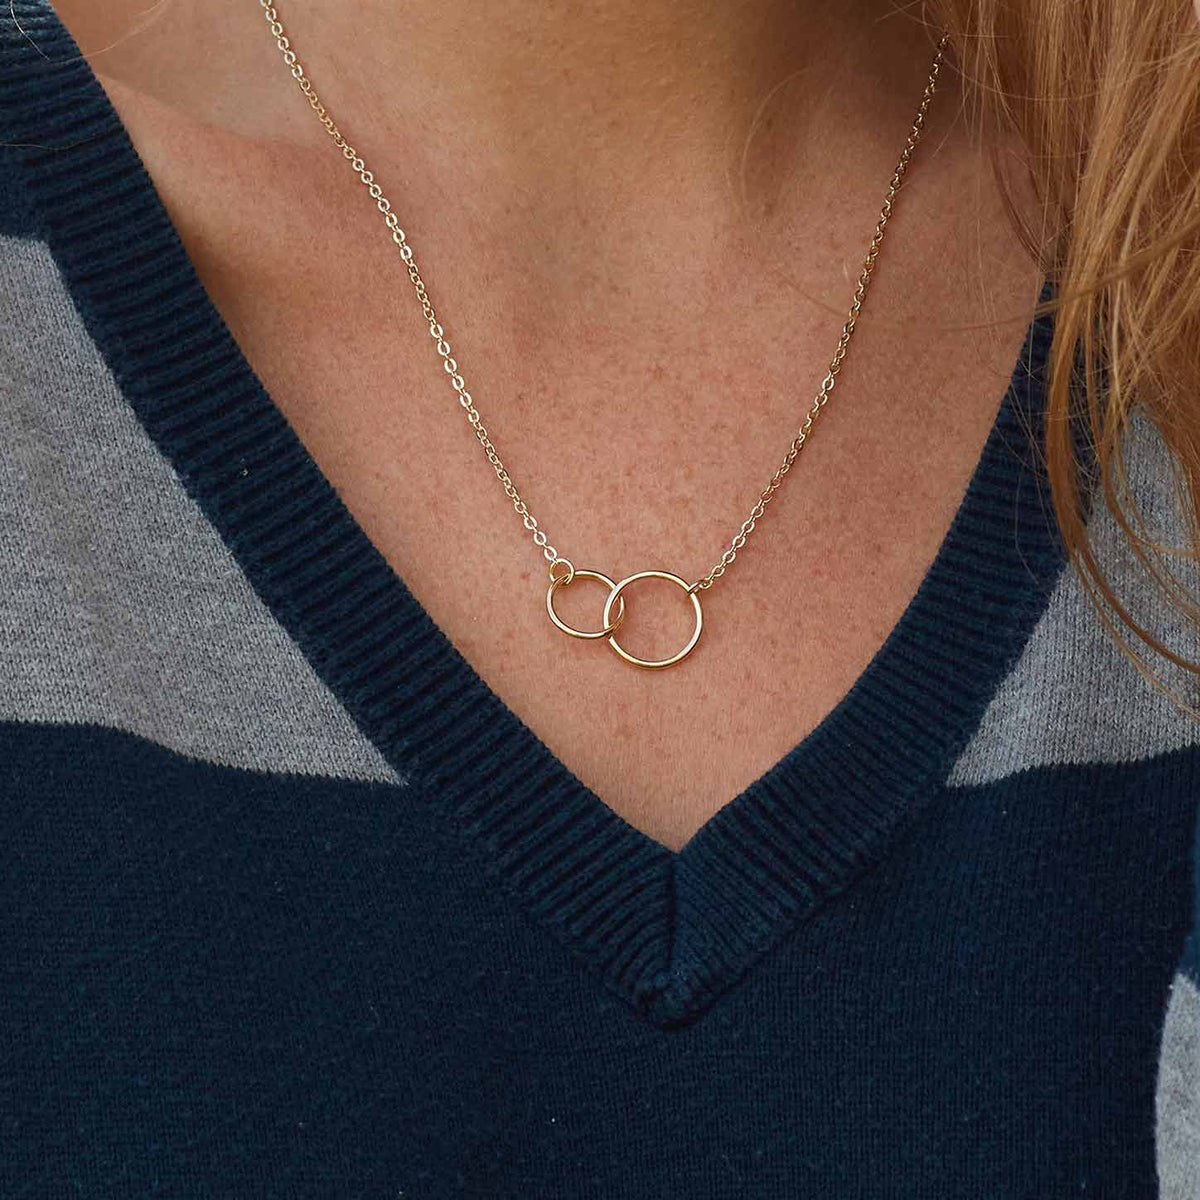 Interlocking Circle Necklace | Gift for Mom